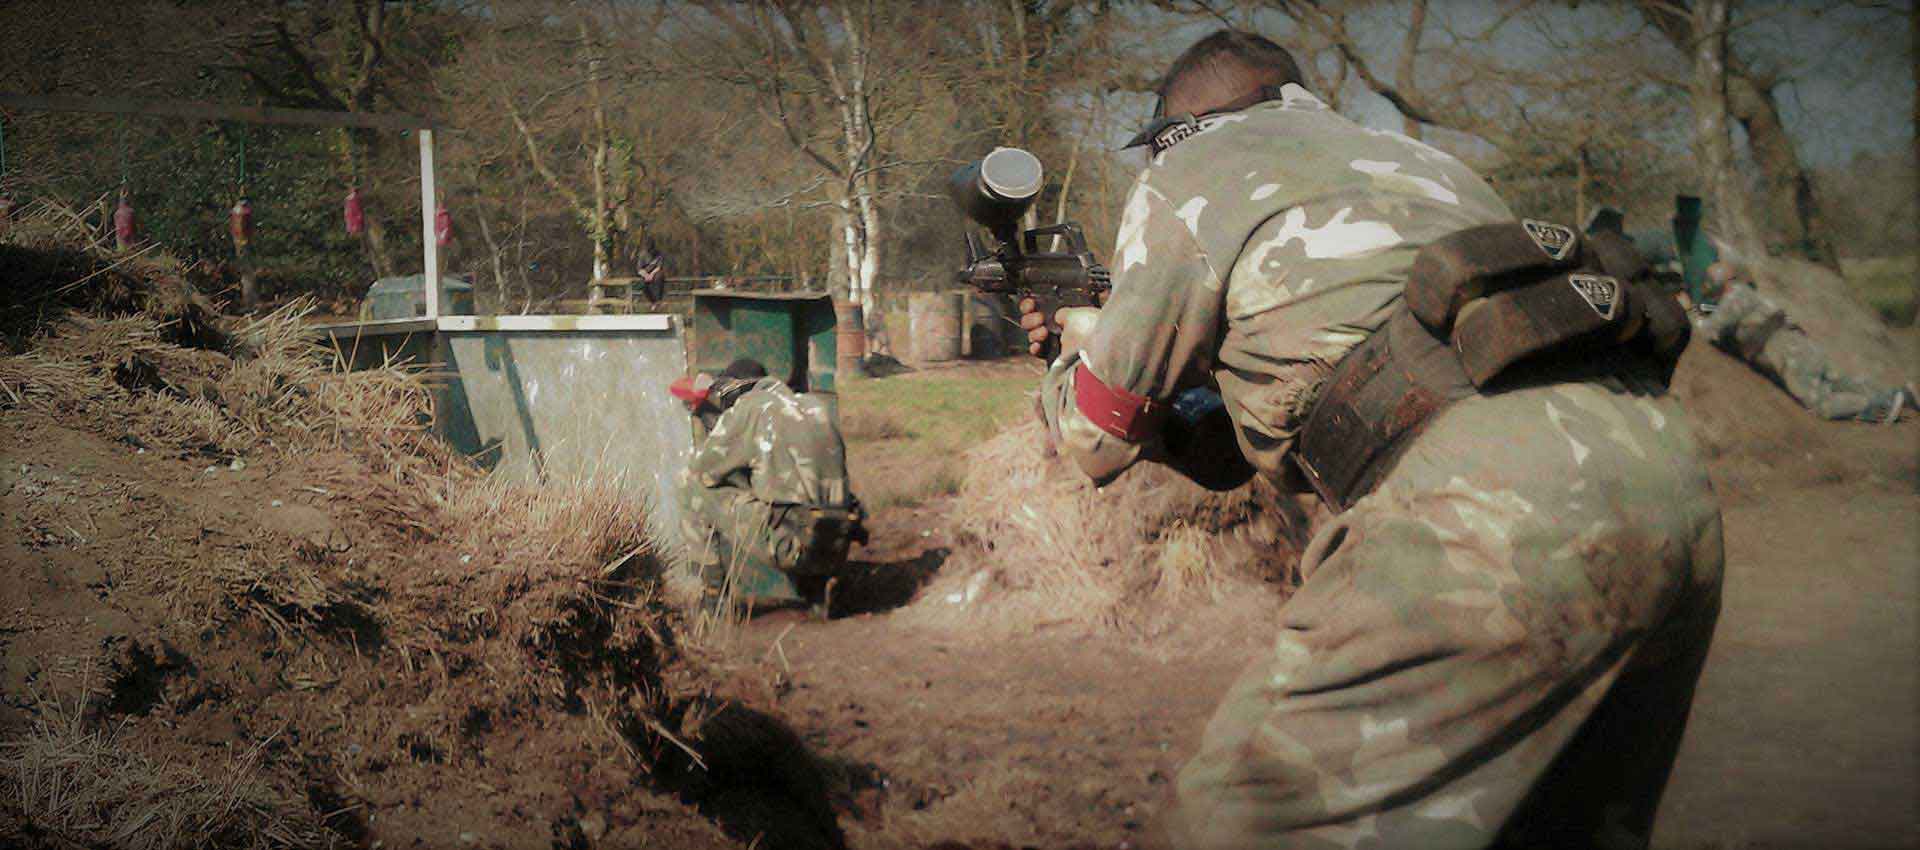 Paintball battle wages as men run forwards attacking the opposing team.